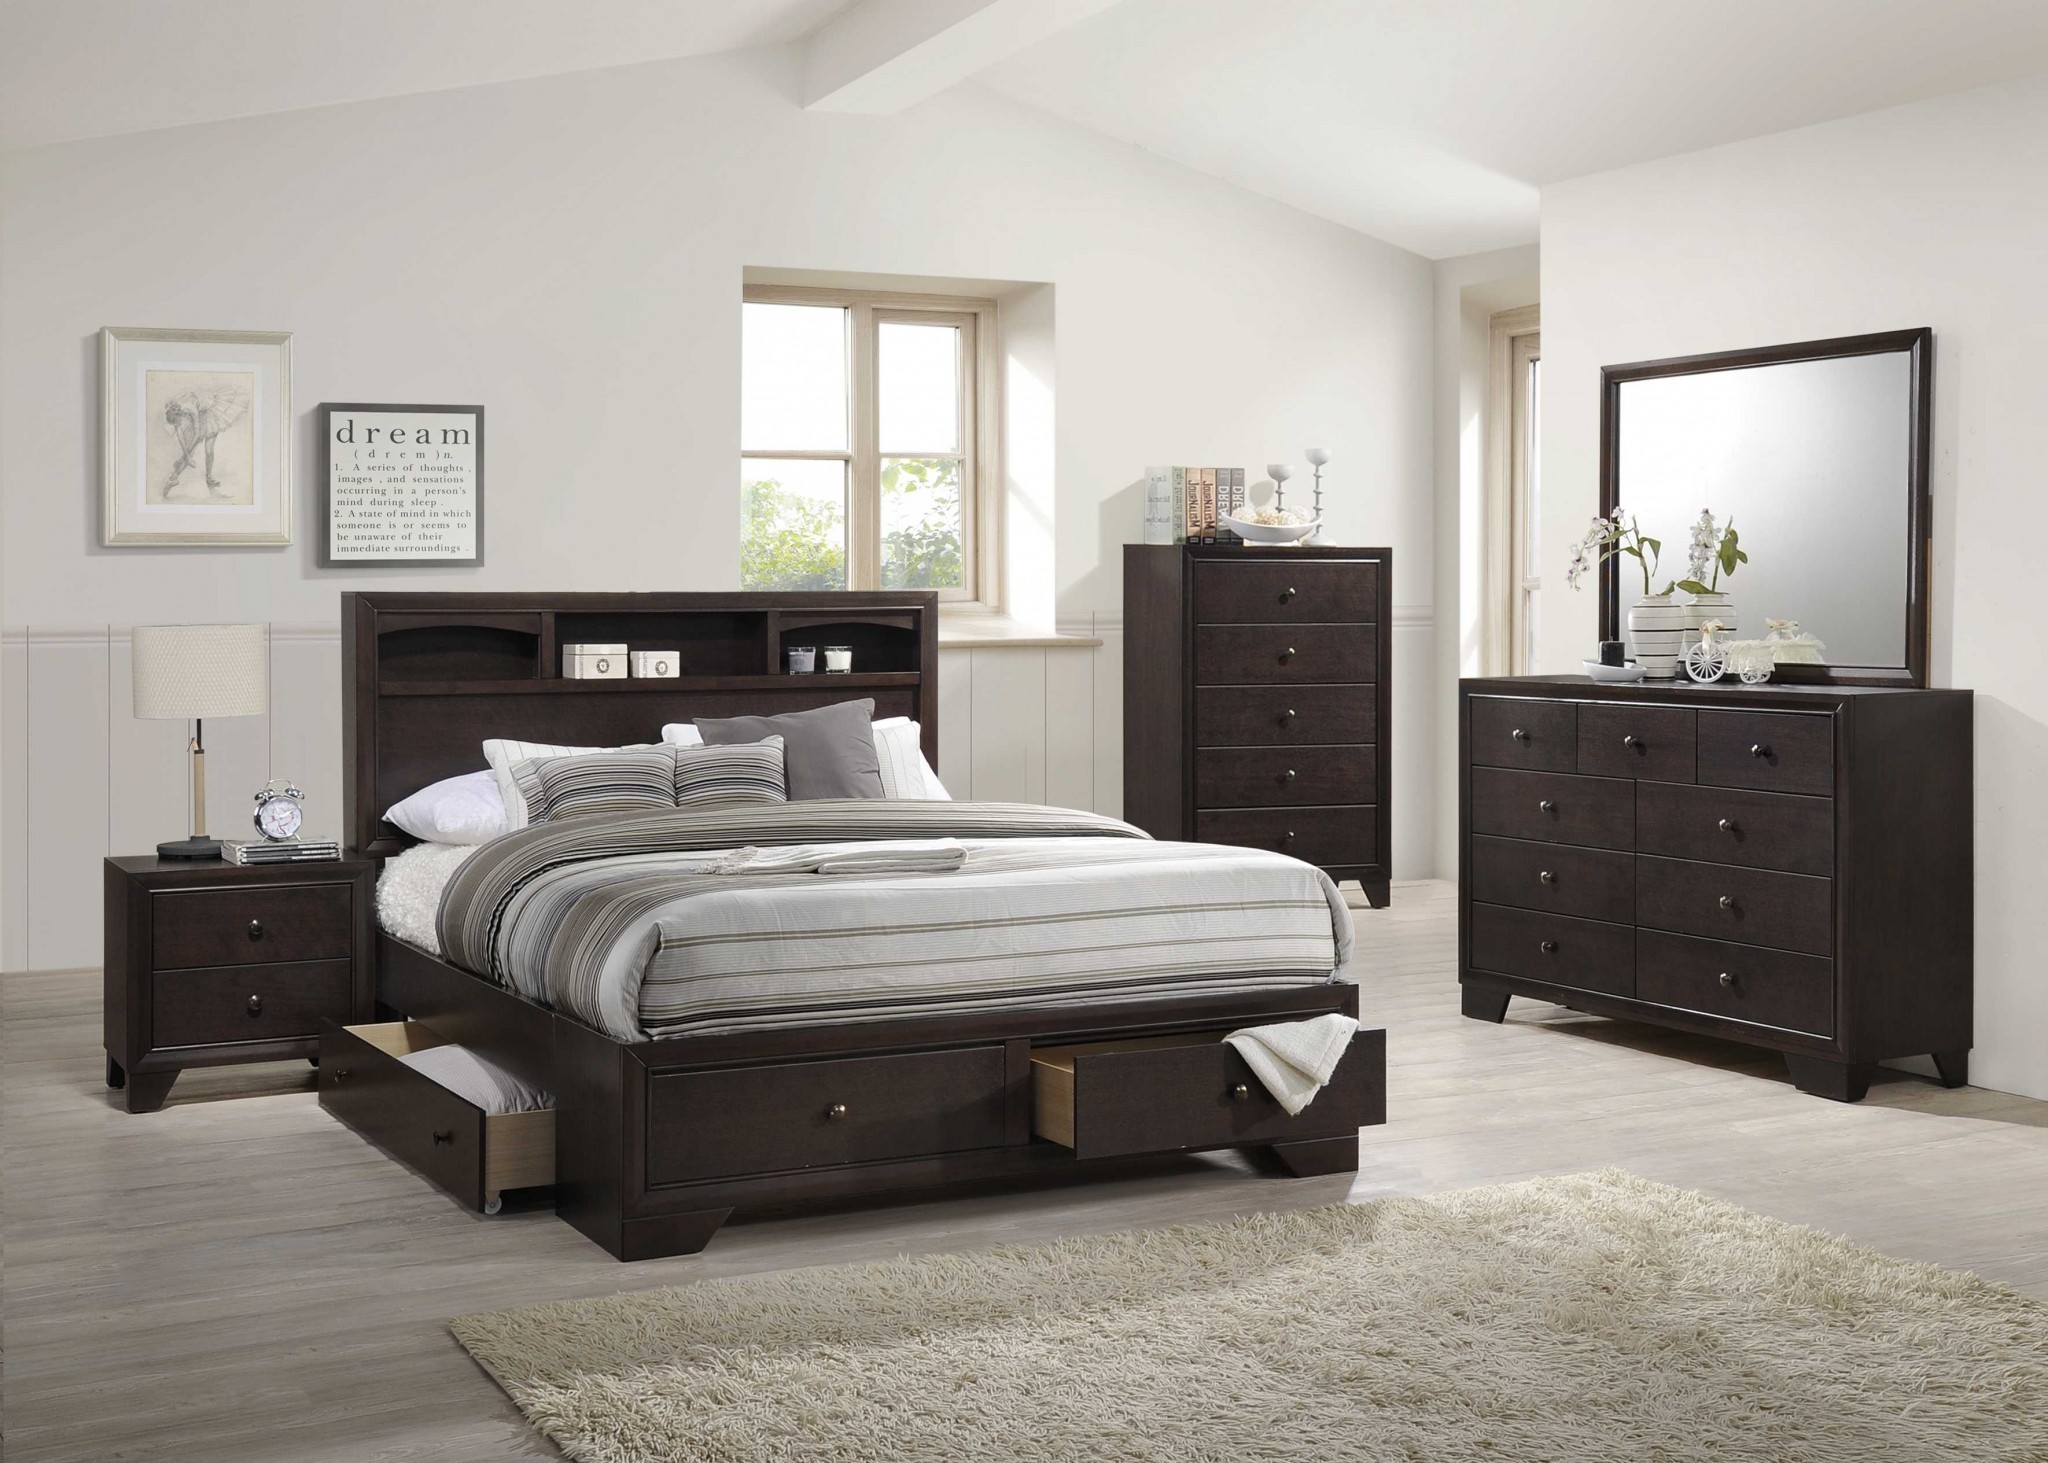 71" X 63" X 48" Espresso Rubber Wood Queen Bed With Storage